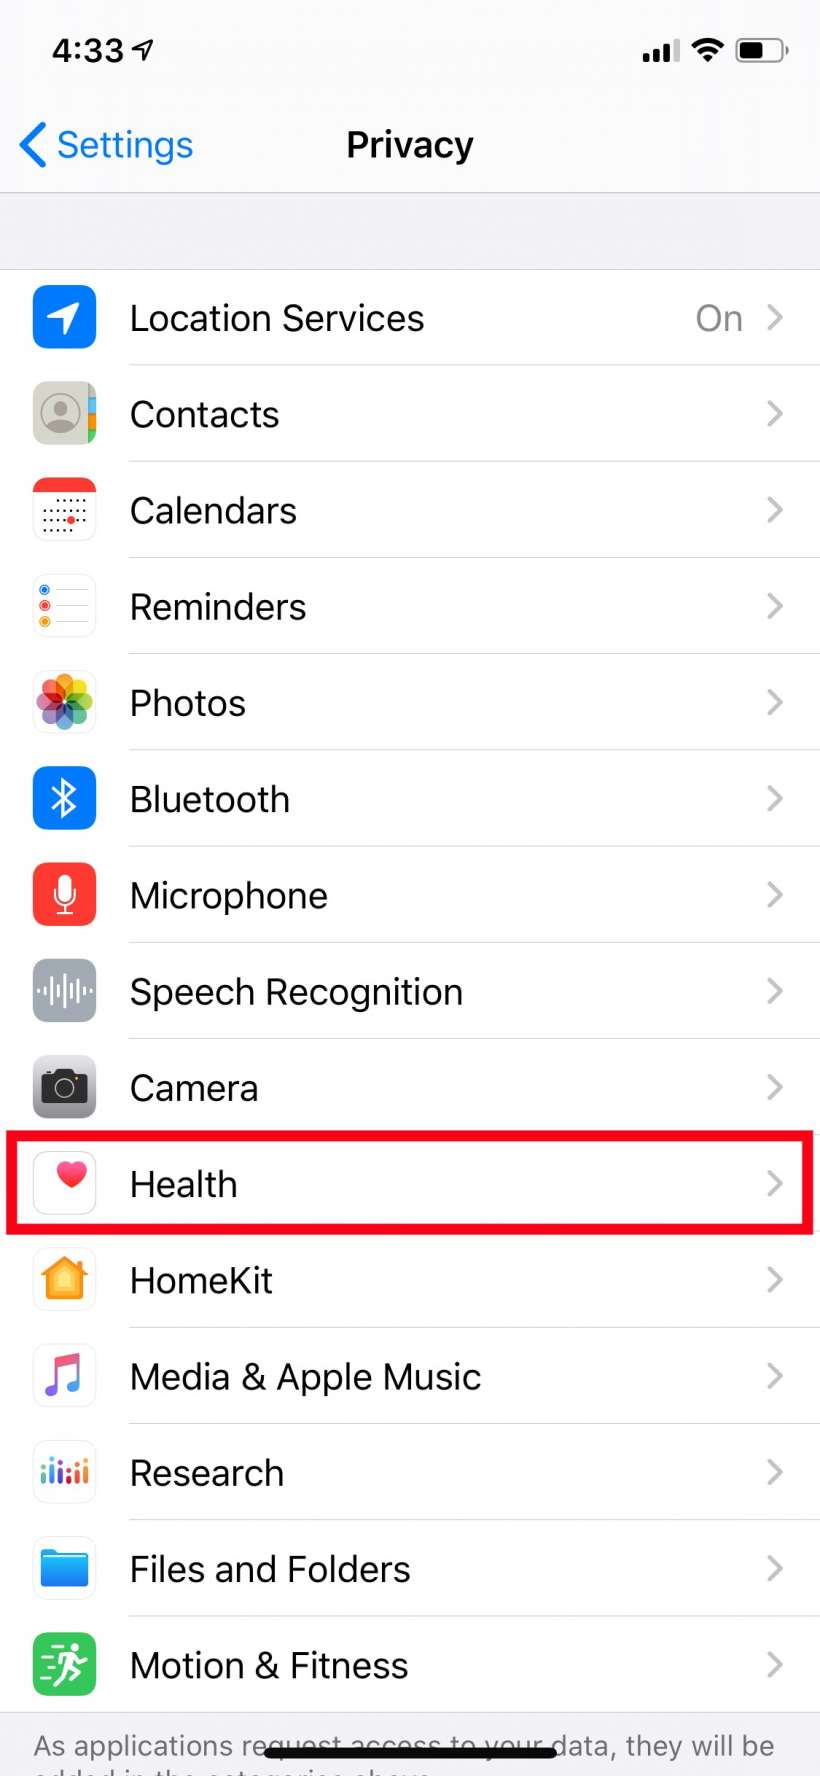 How to enable COVID-19 exposure logging and notifications on iPhone and iPad.